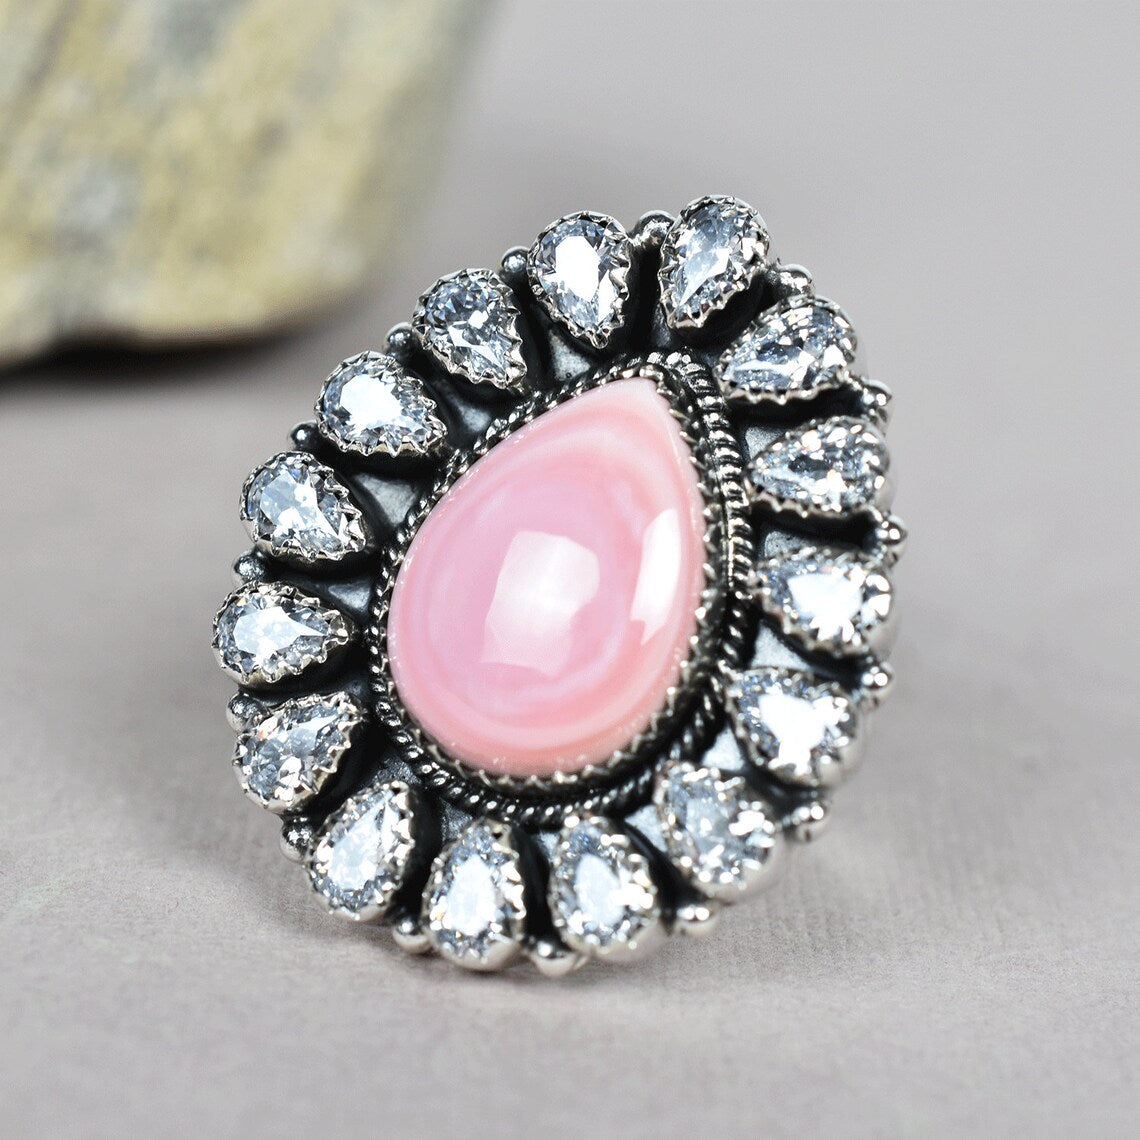 Native American Pink Conch Shell & Cubic Zirconia Cluster Rings - 925 Sterling Silver Handmade Vintage Rings